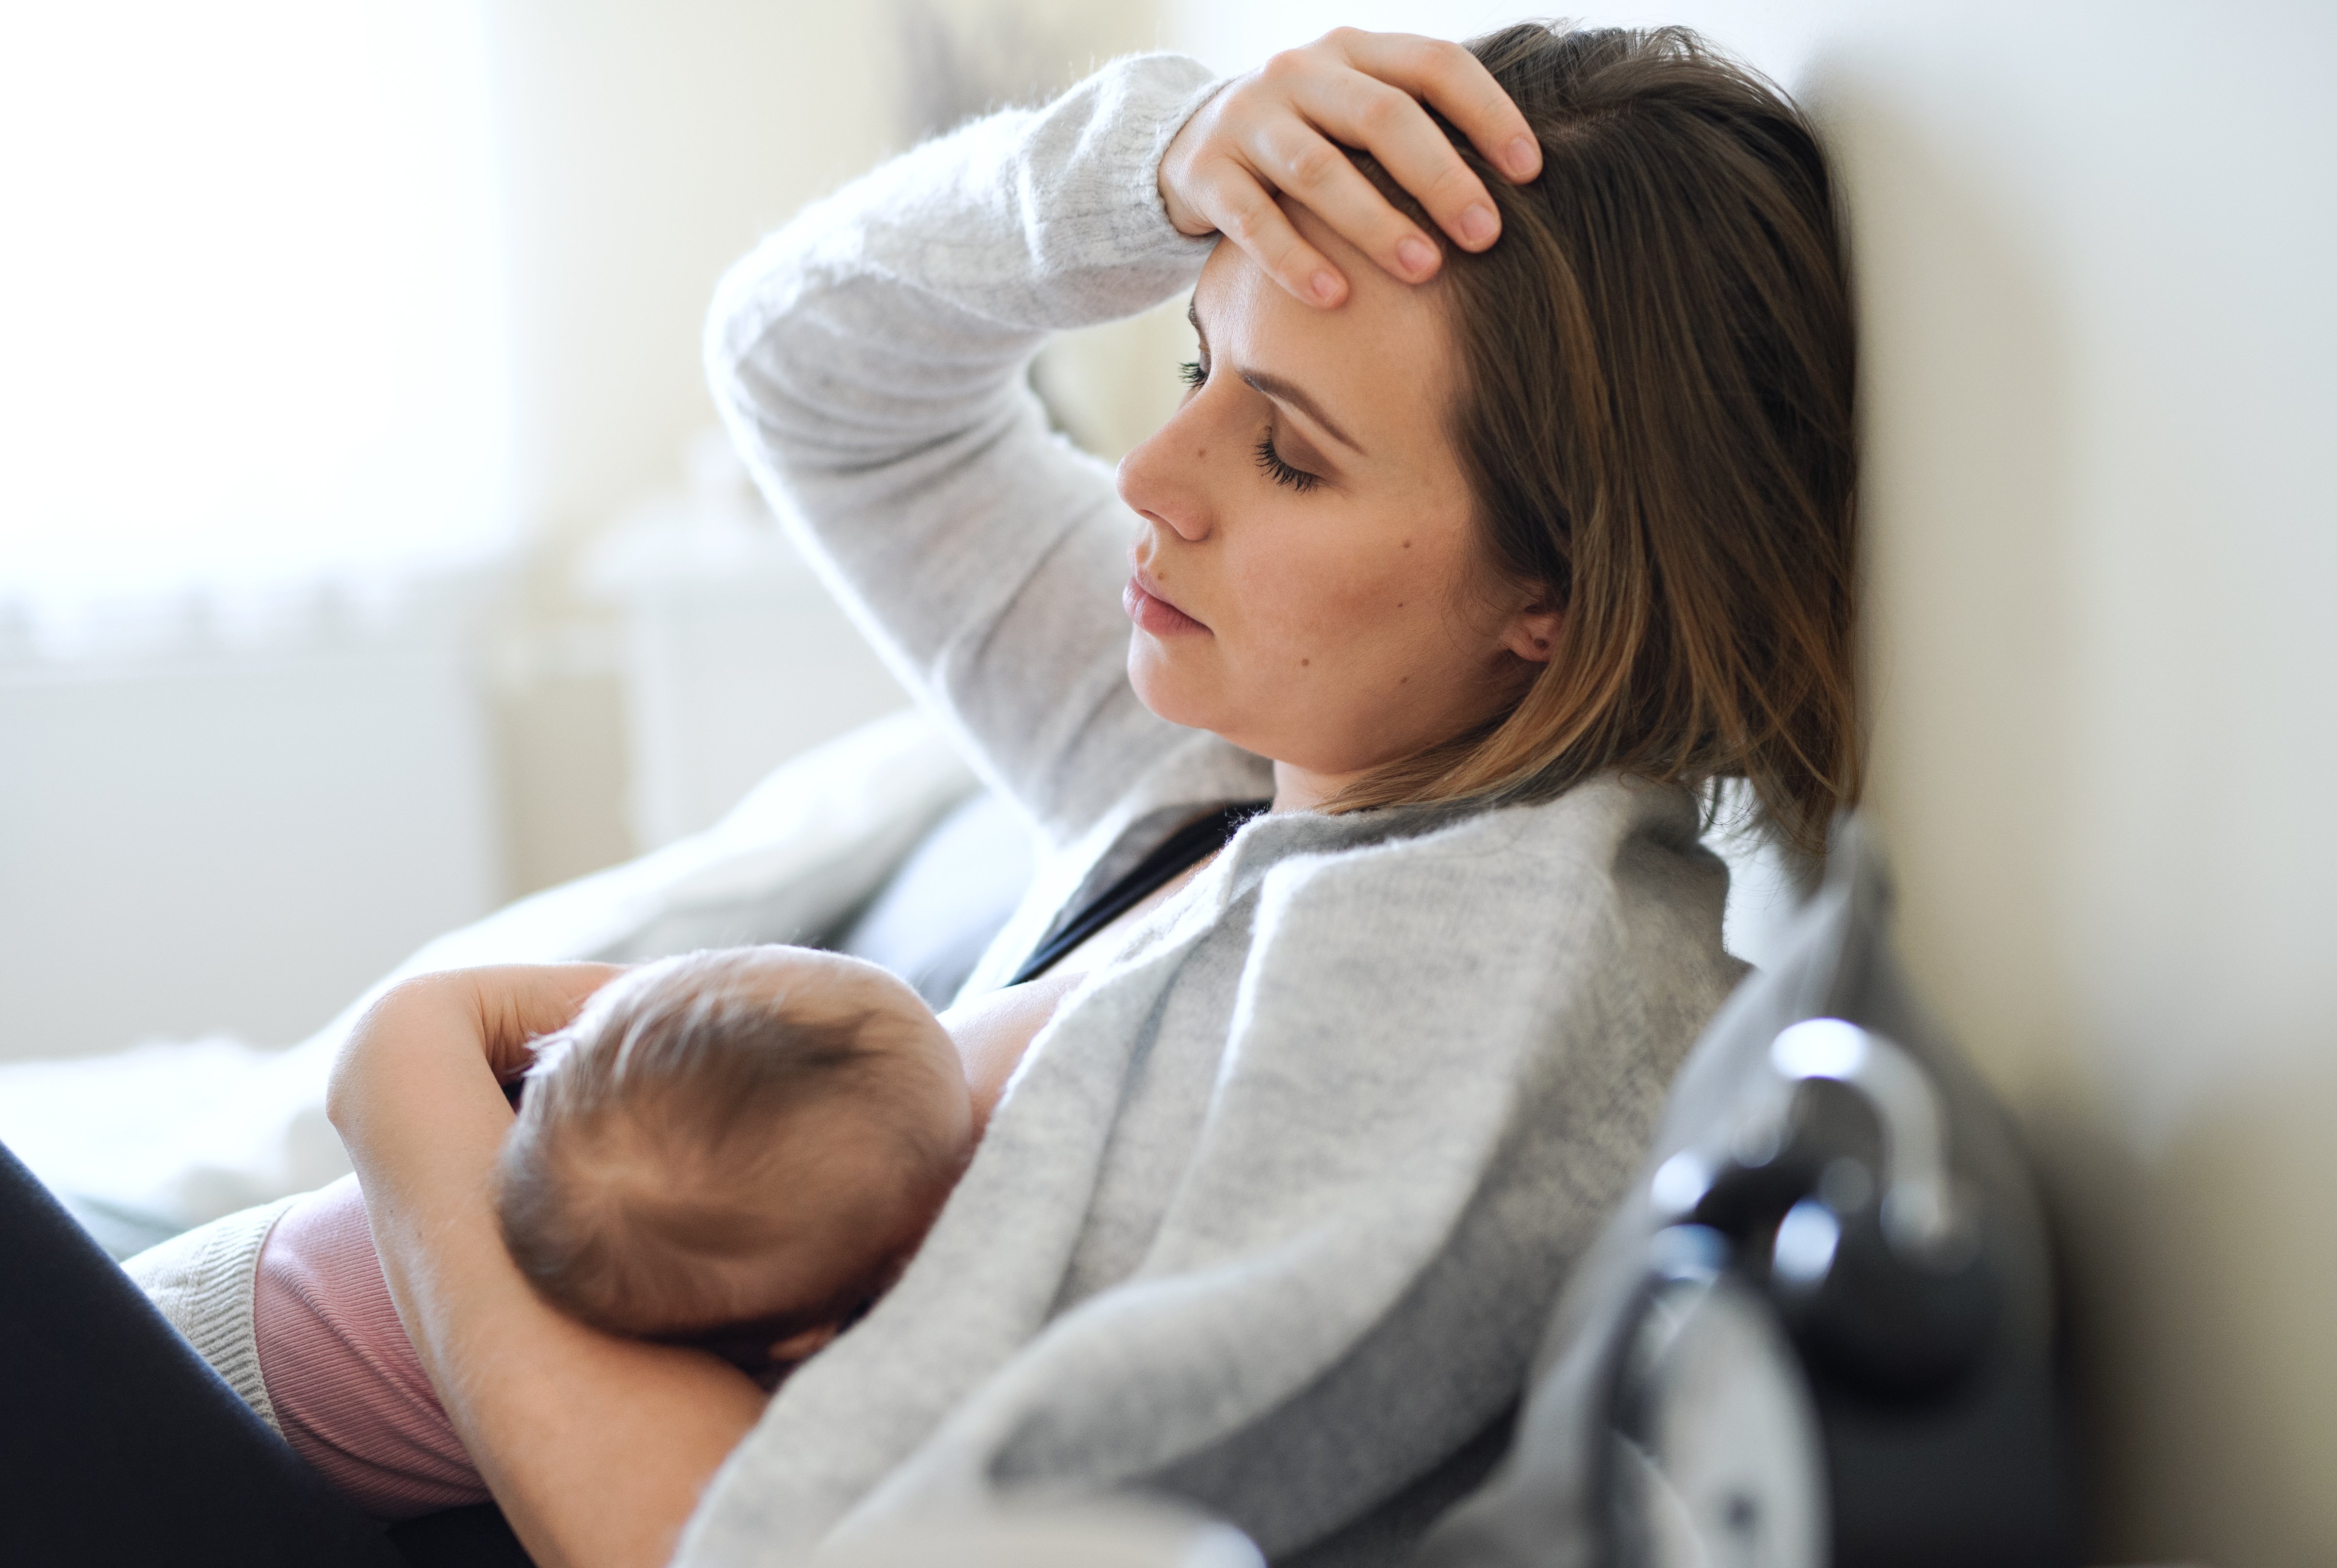 A tired mother breastfeeding her baby. | Source: Getty Images